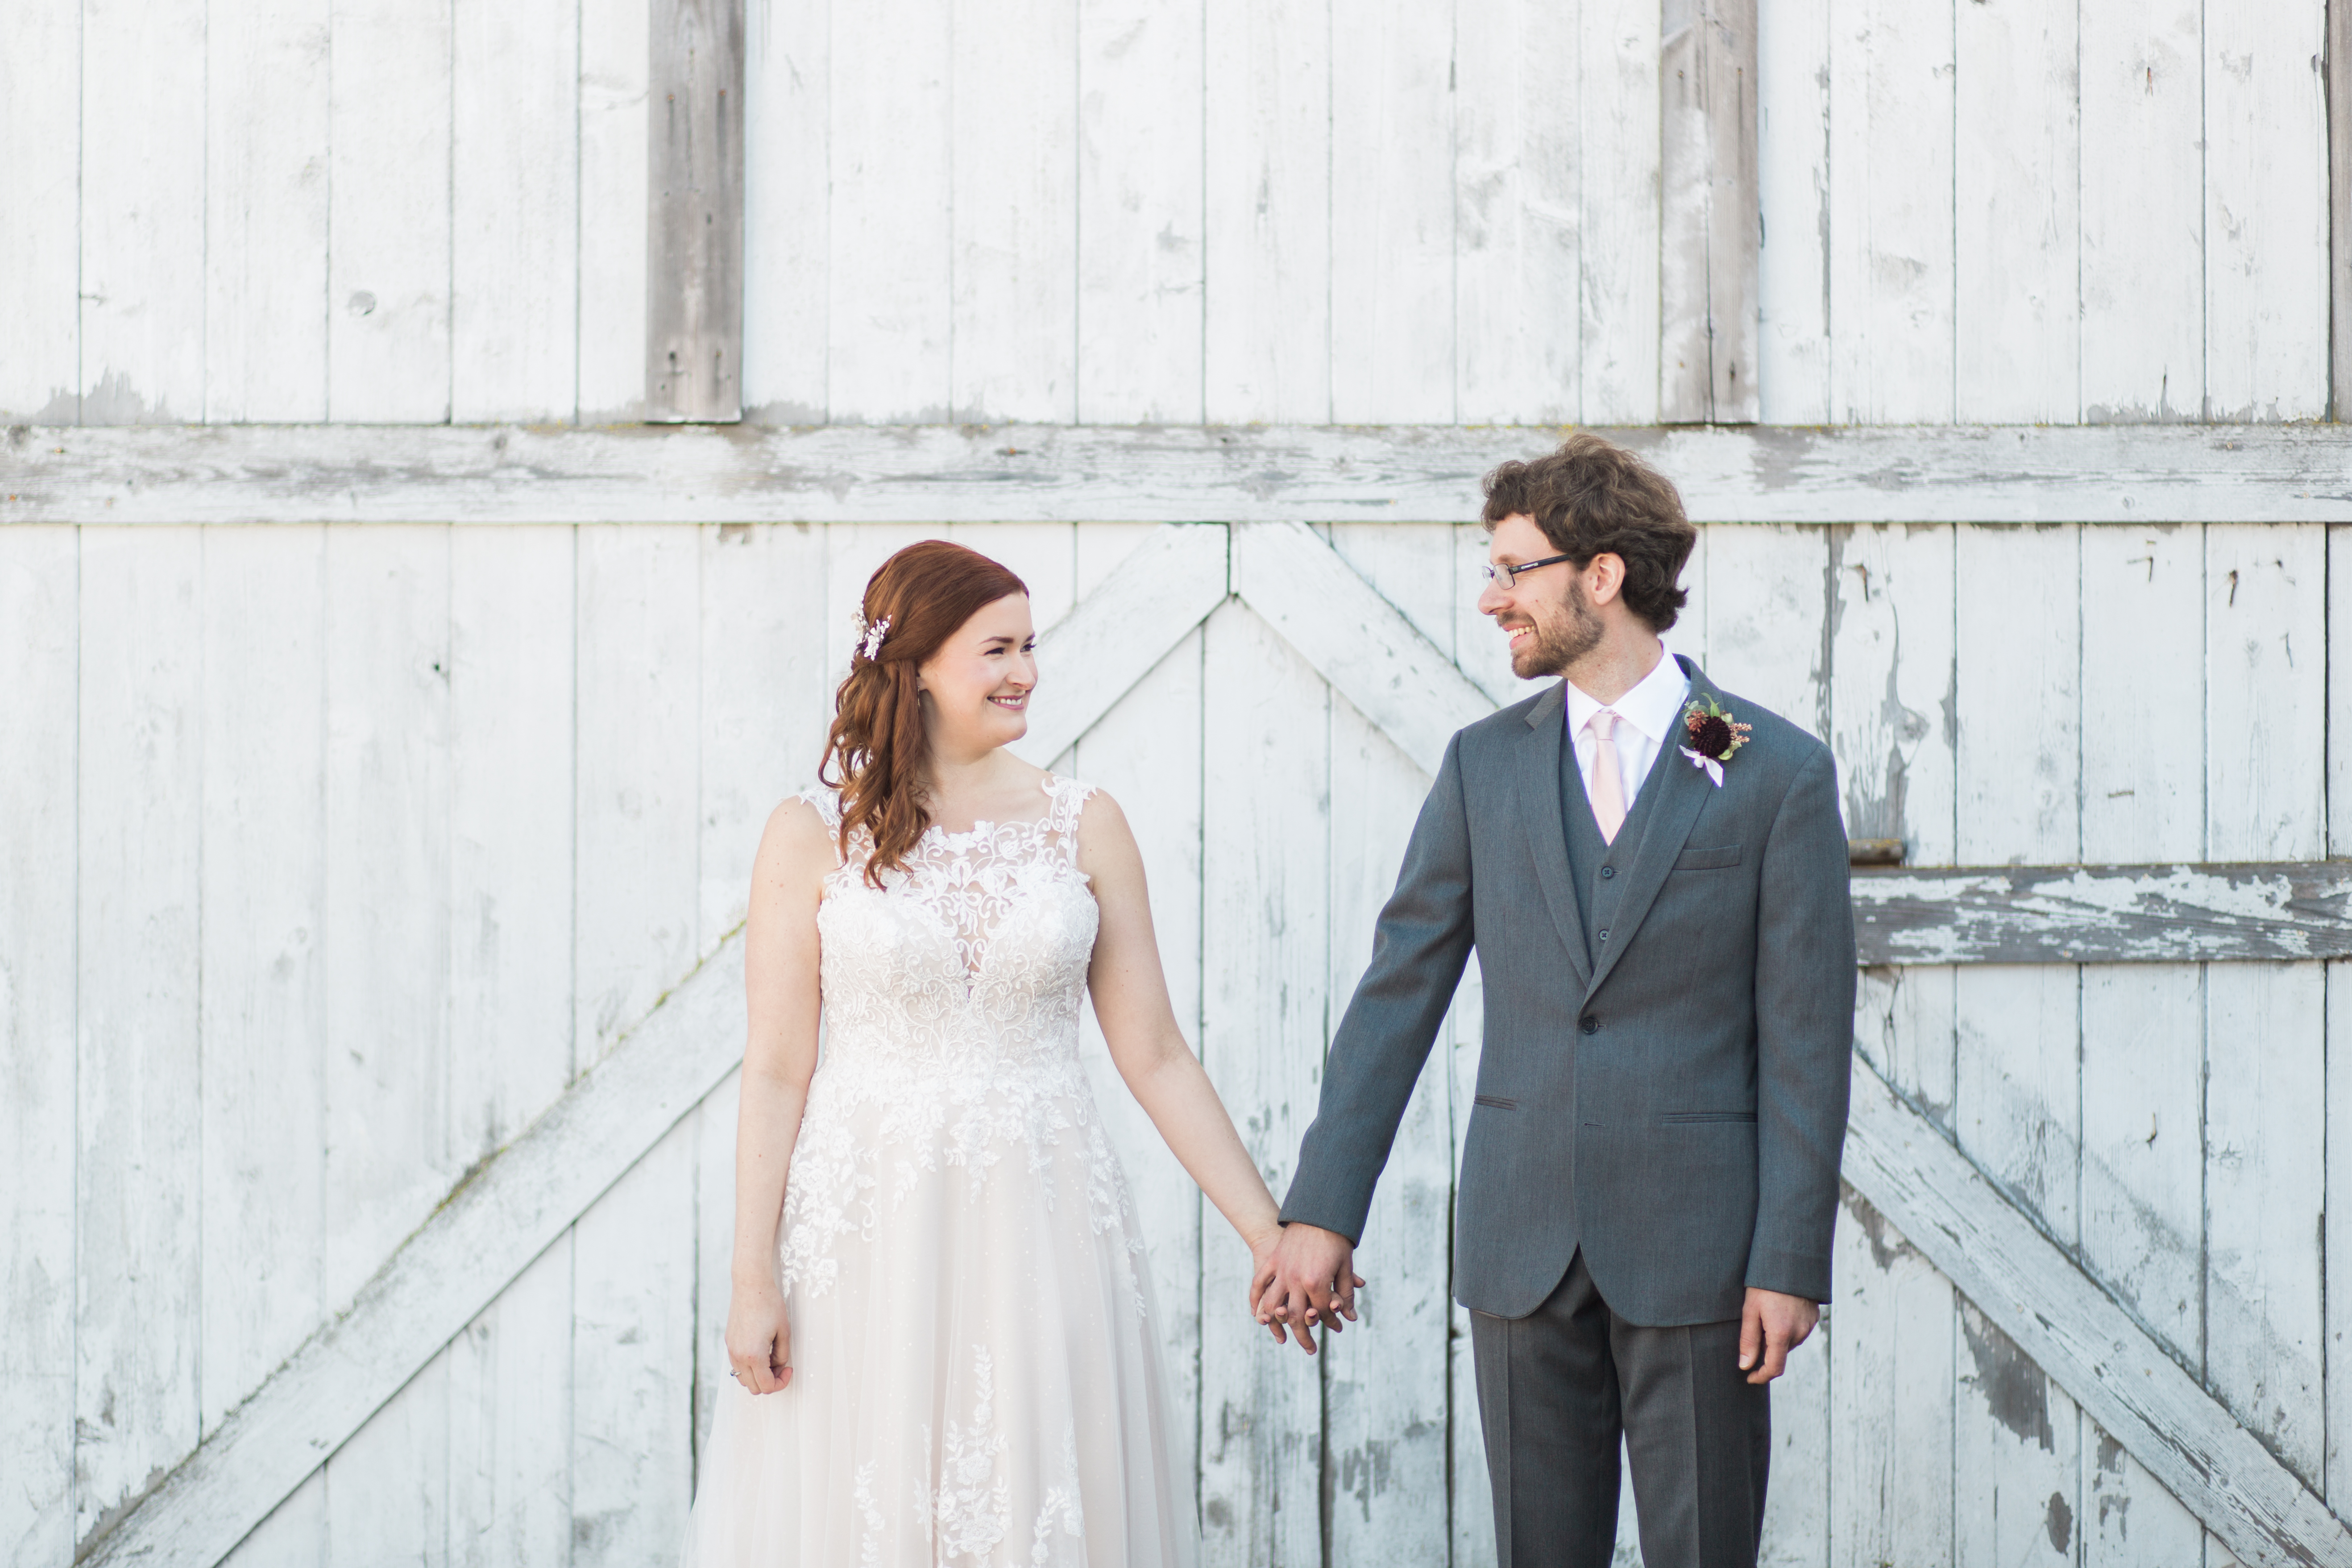 Kate and Jon's dreamy, DIY fall Dairyland wedding in Snohomish, featuring a white-washed barn, vintage touches, and lush burgundy and rose floral. | Joanna Monger Photography